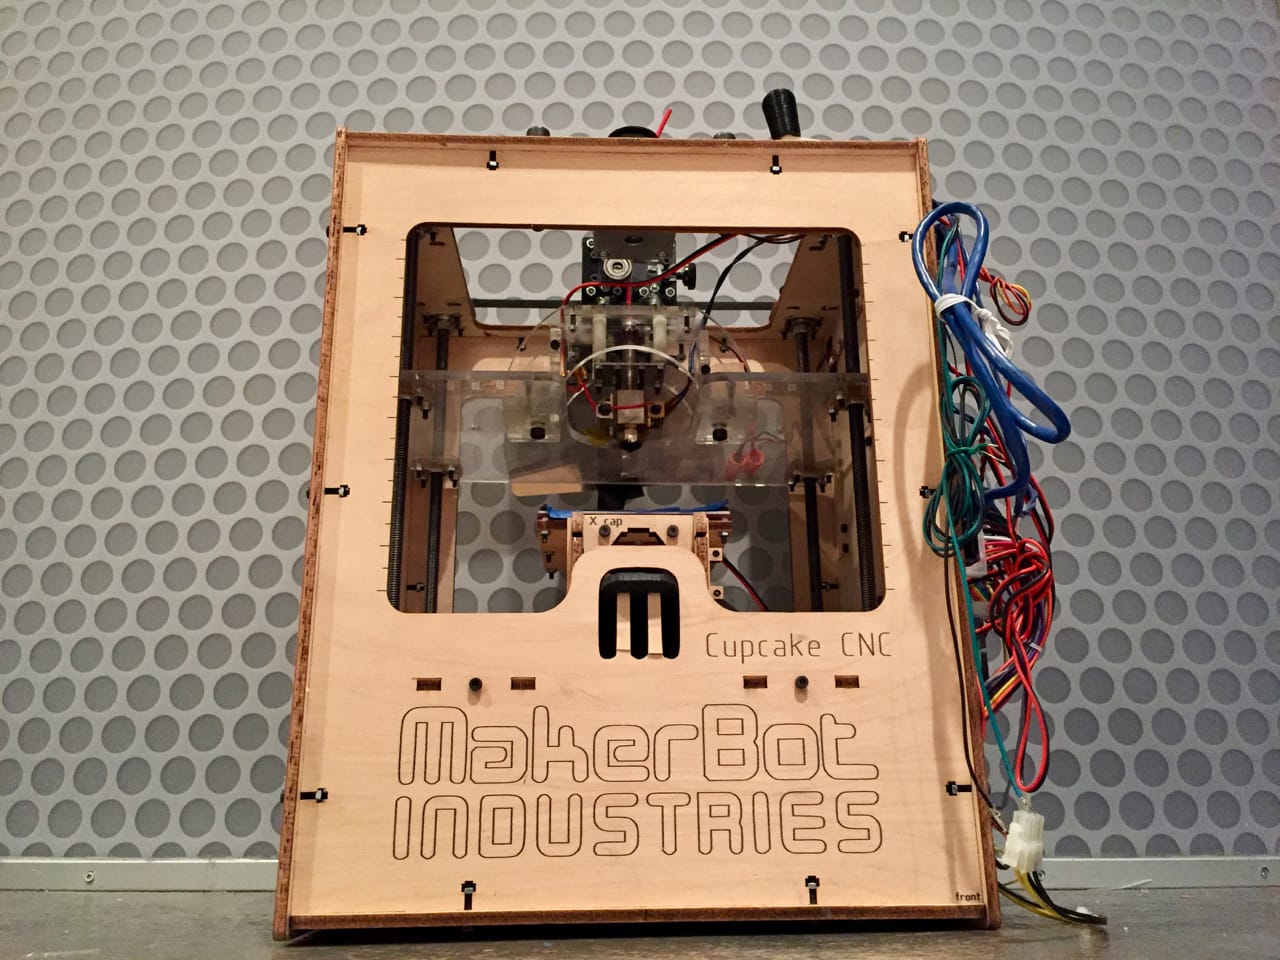  The original MakerBot CupCake desktop 3D printer, made from a kit of very small parts 